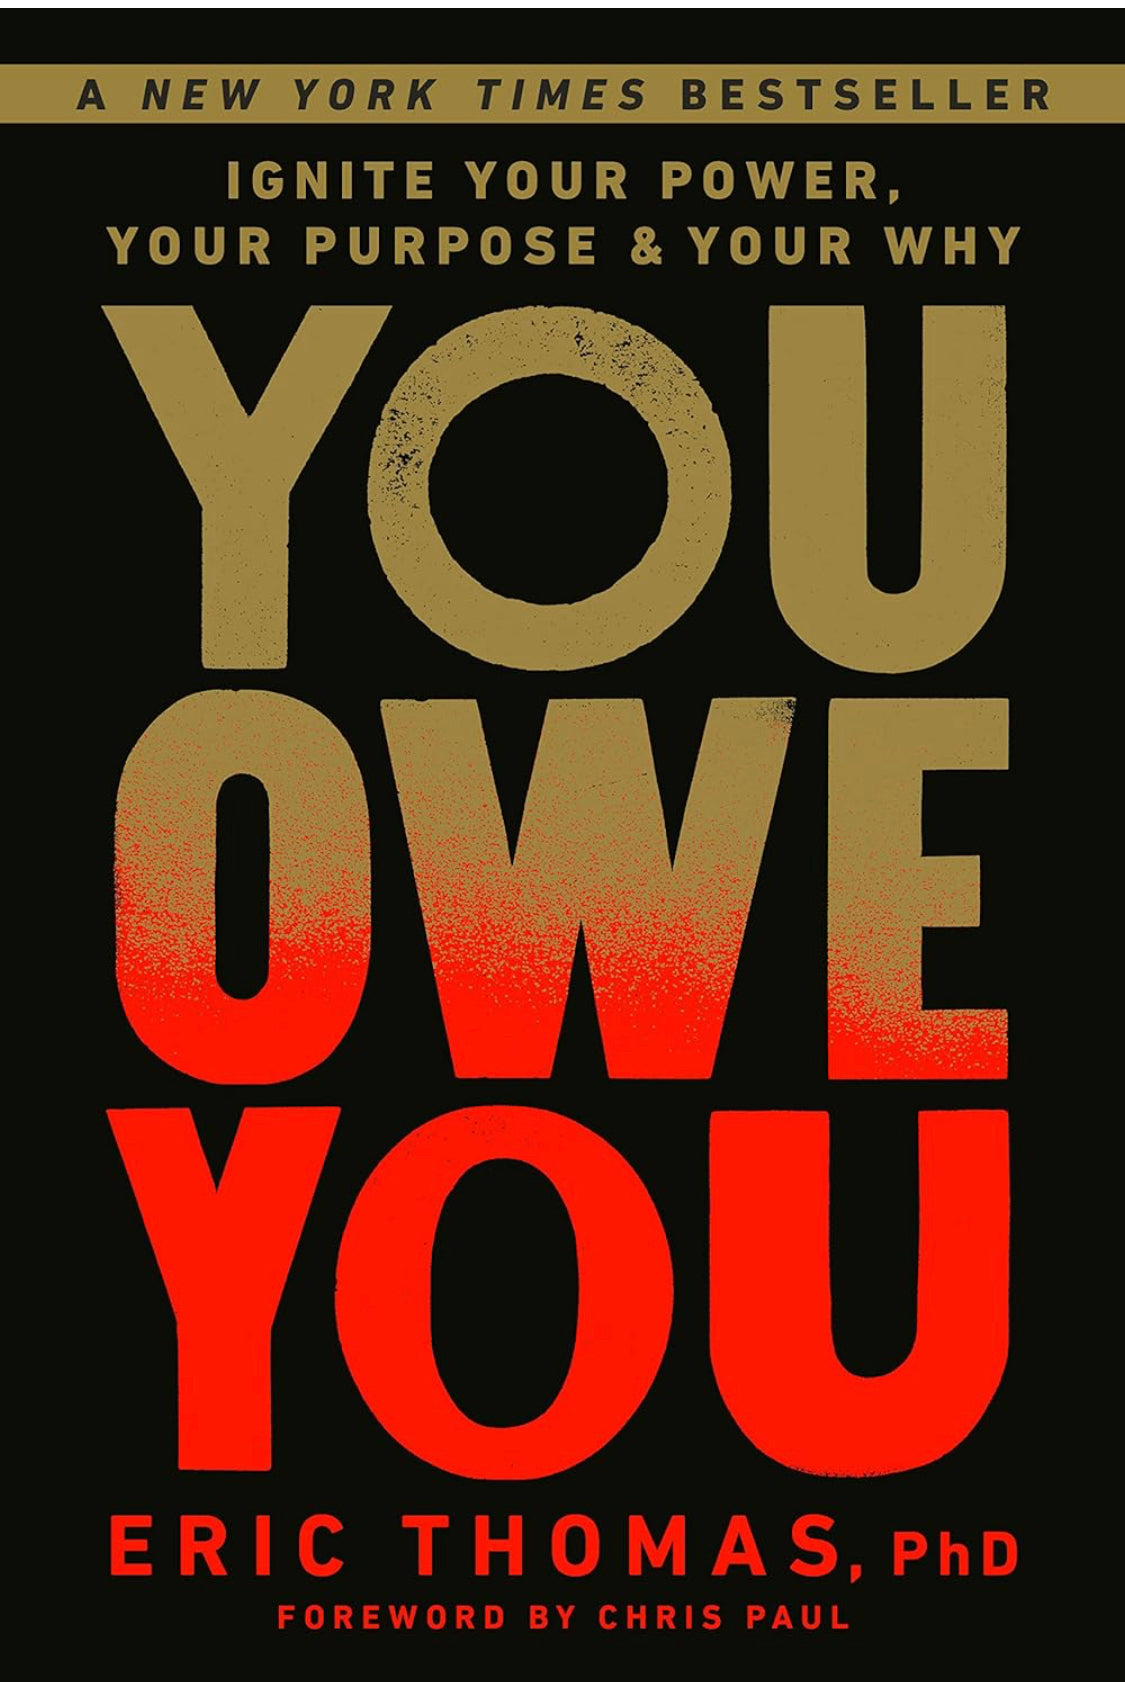 You Owe You(Ignite your power, Your purpose &your why)